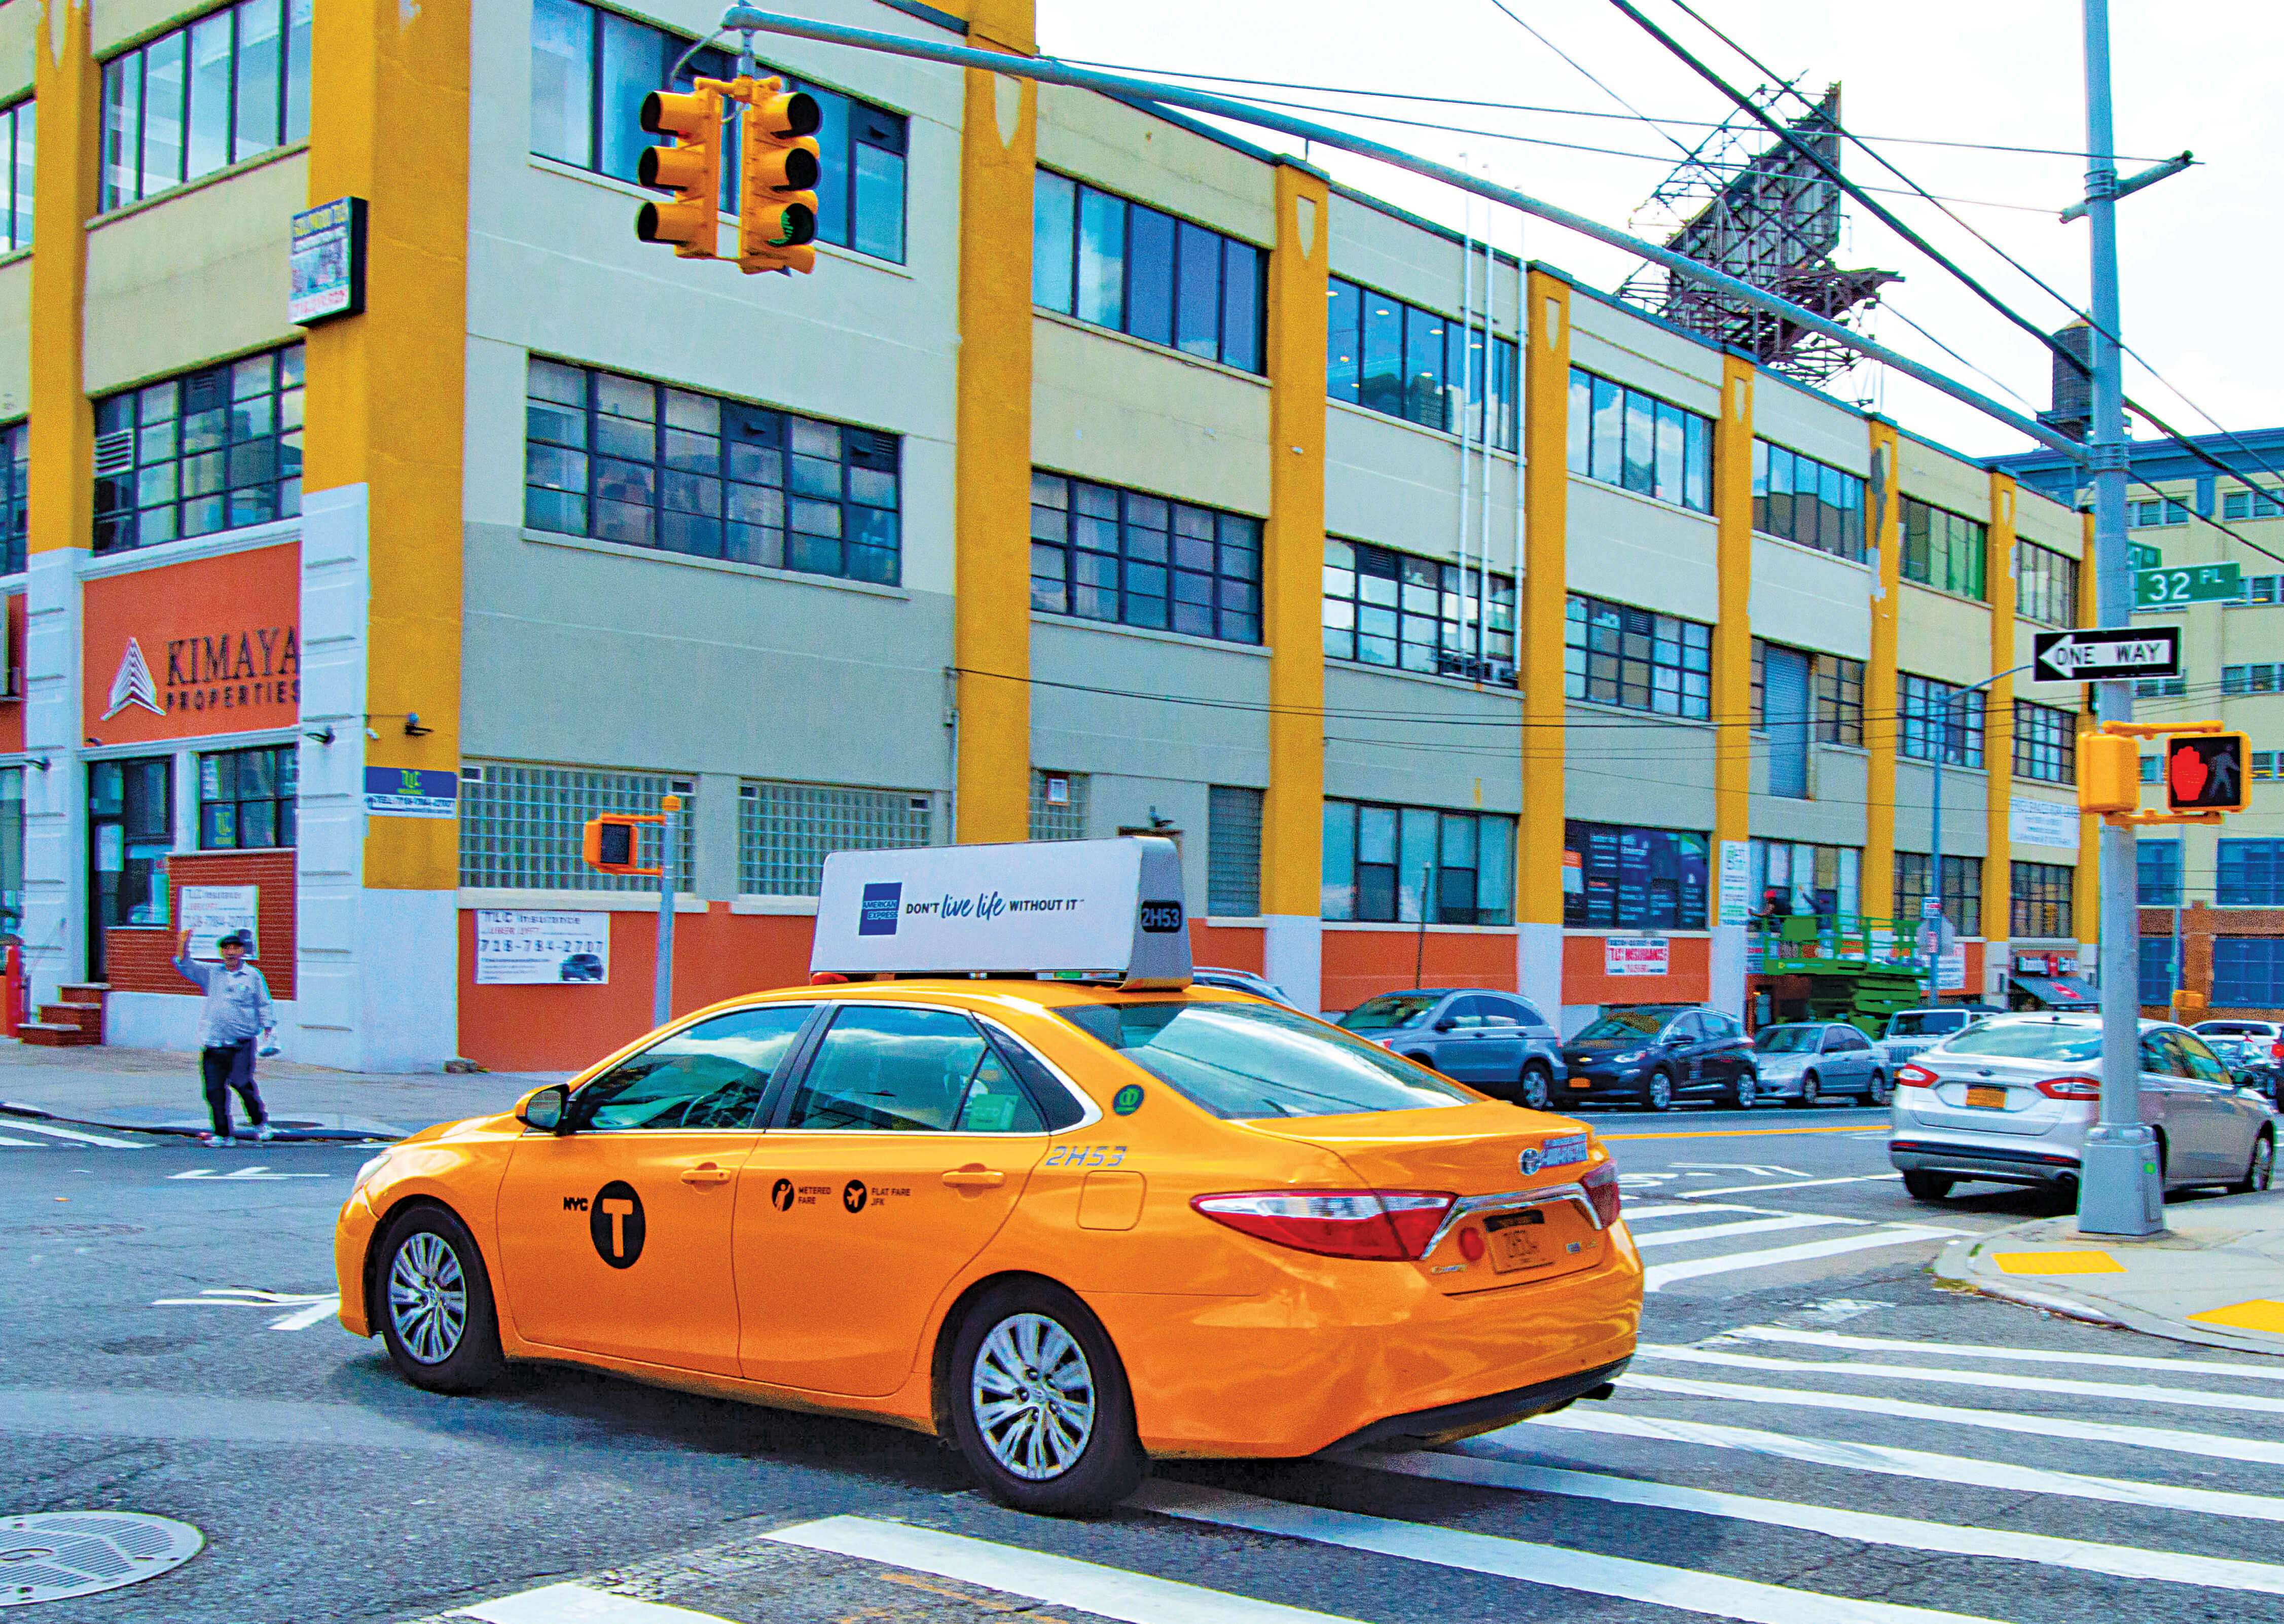 A yellow cab traveling through Queens